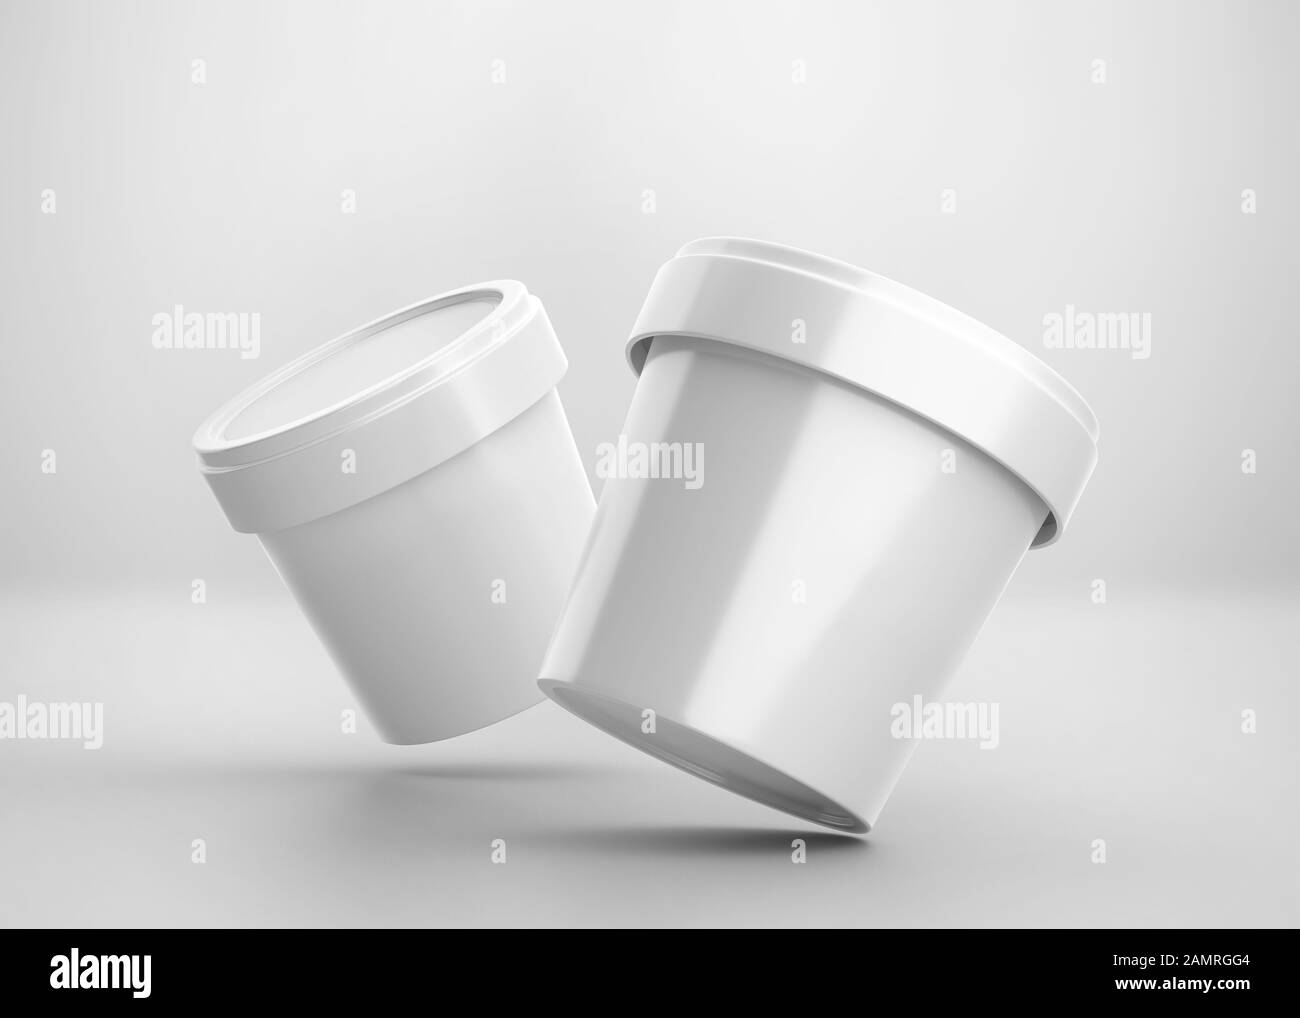 Download White Ice Cream Cup With Cap Mockup Blank Plastic Tub Container 3d Rendering Isolated On Light Background Stock Photo Alamy Yellowimages Mockups